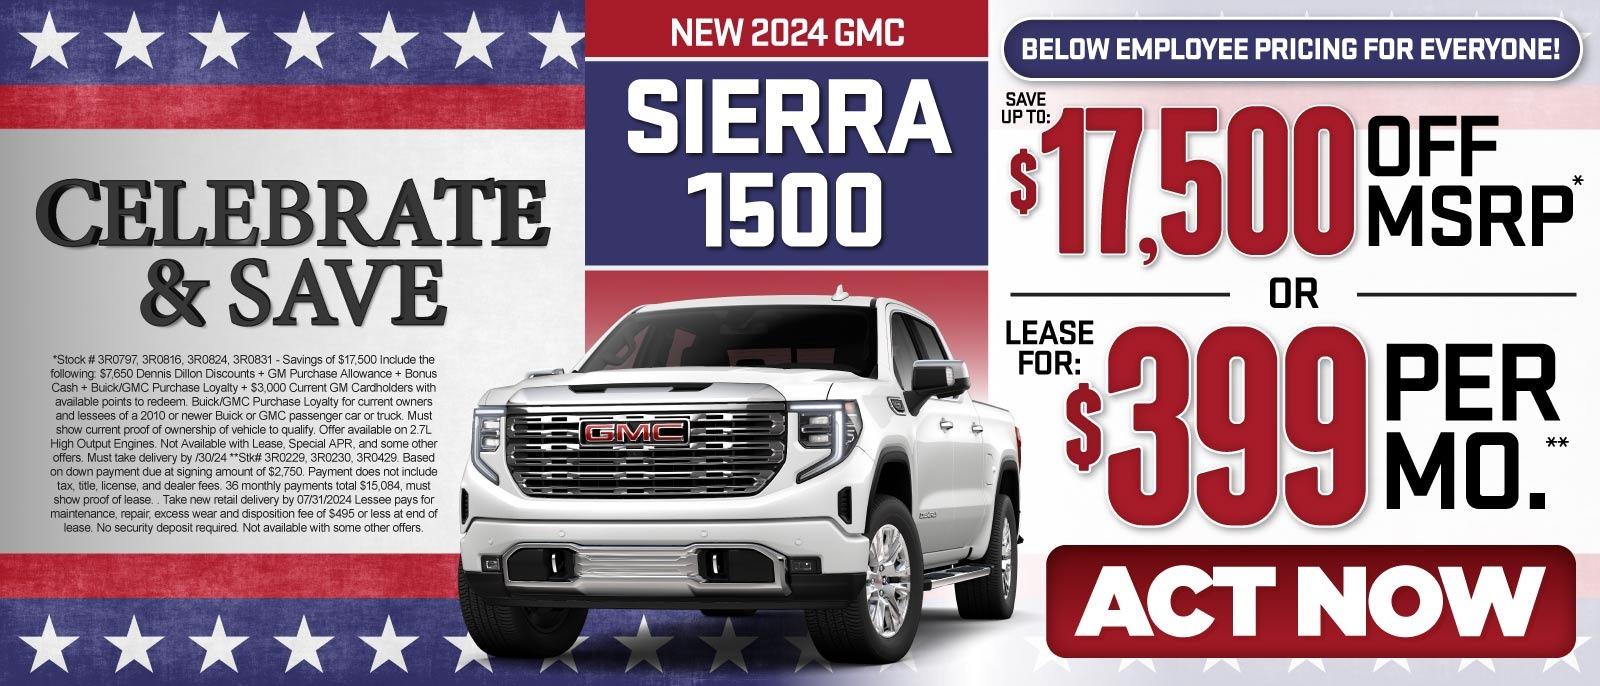 New 2024 GMC Sierra 1500 - Below employee Pricing For Everyone! | Save Up To: $17,500 Off MSRP* Or Lease For: $399 Per Month** — Act Now